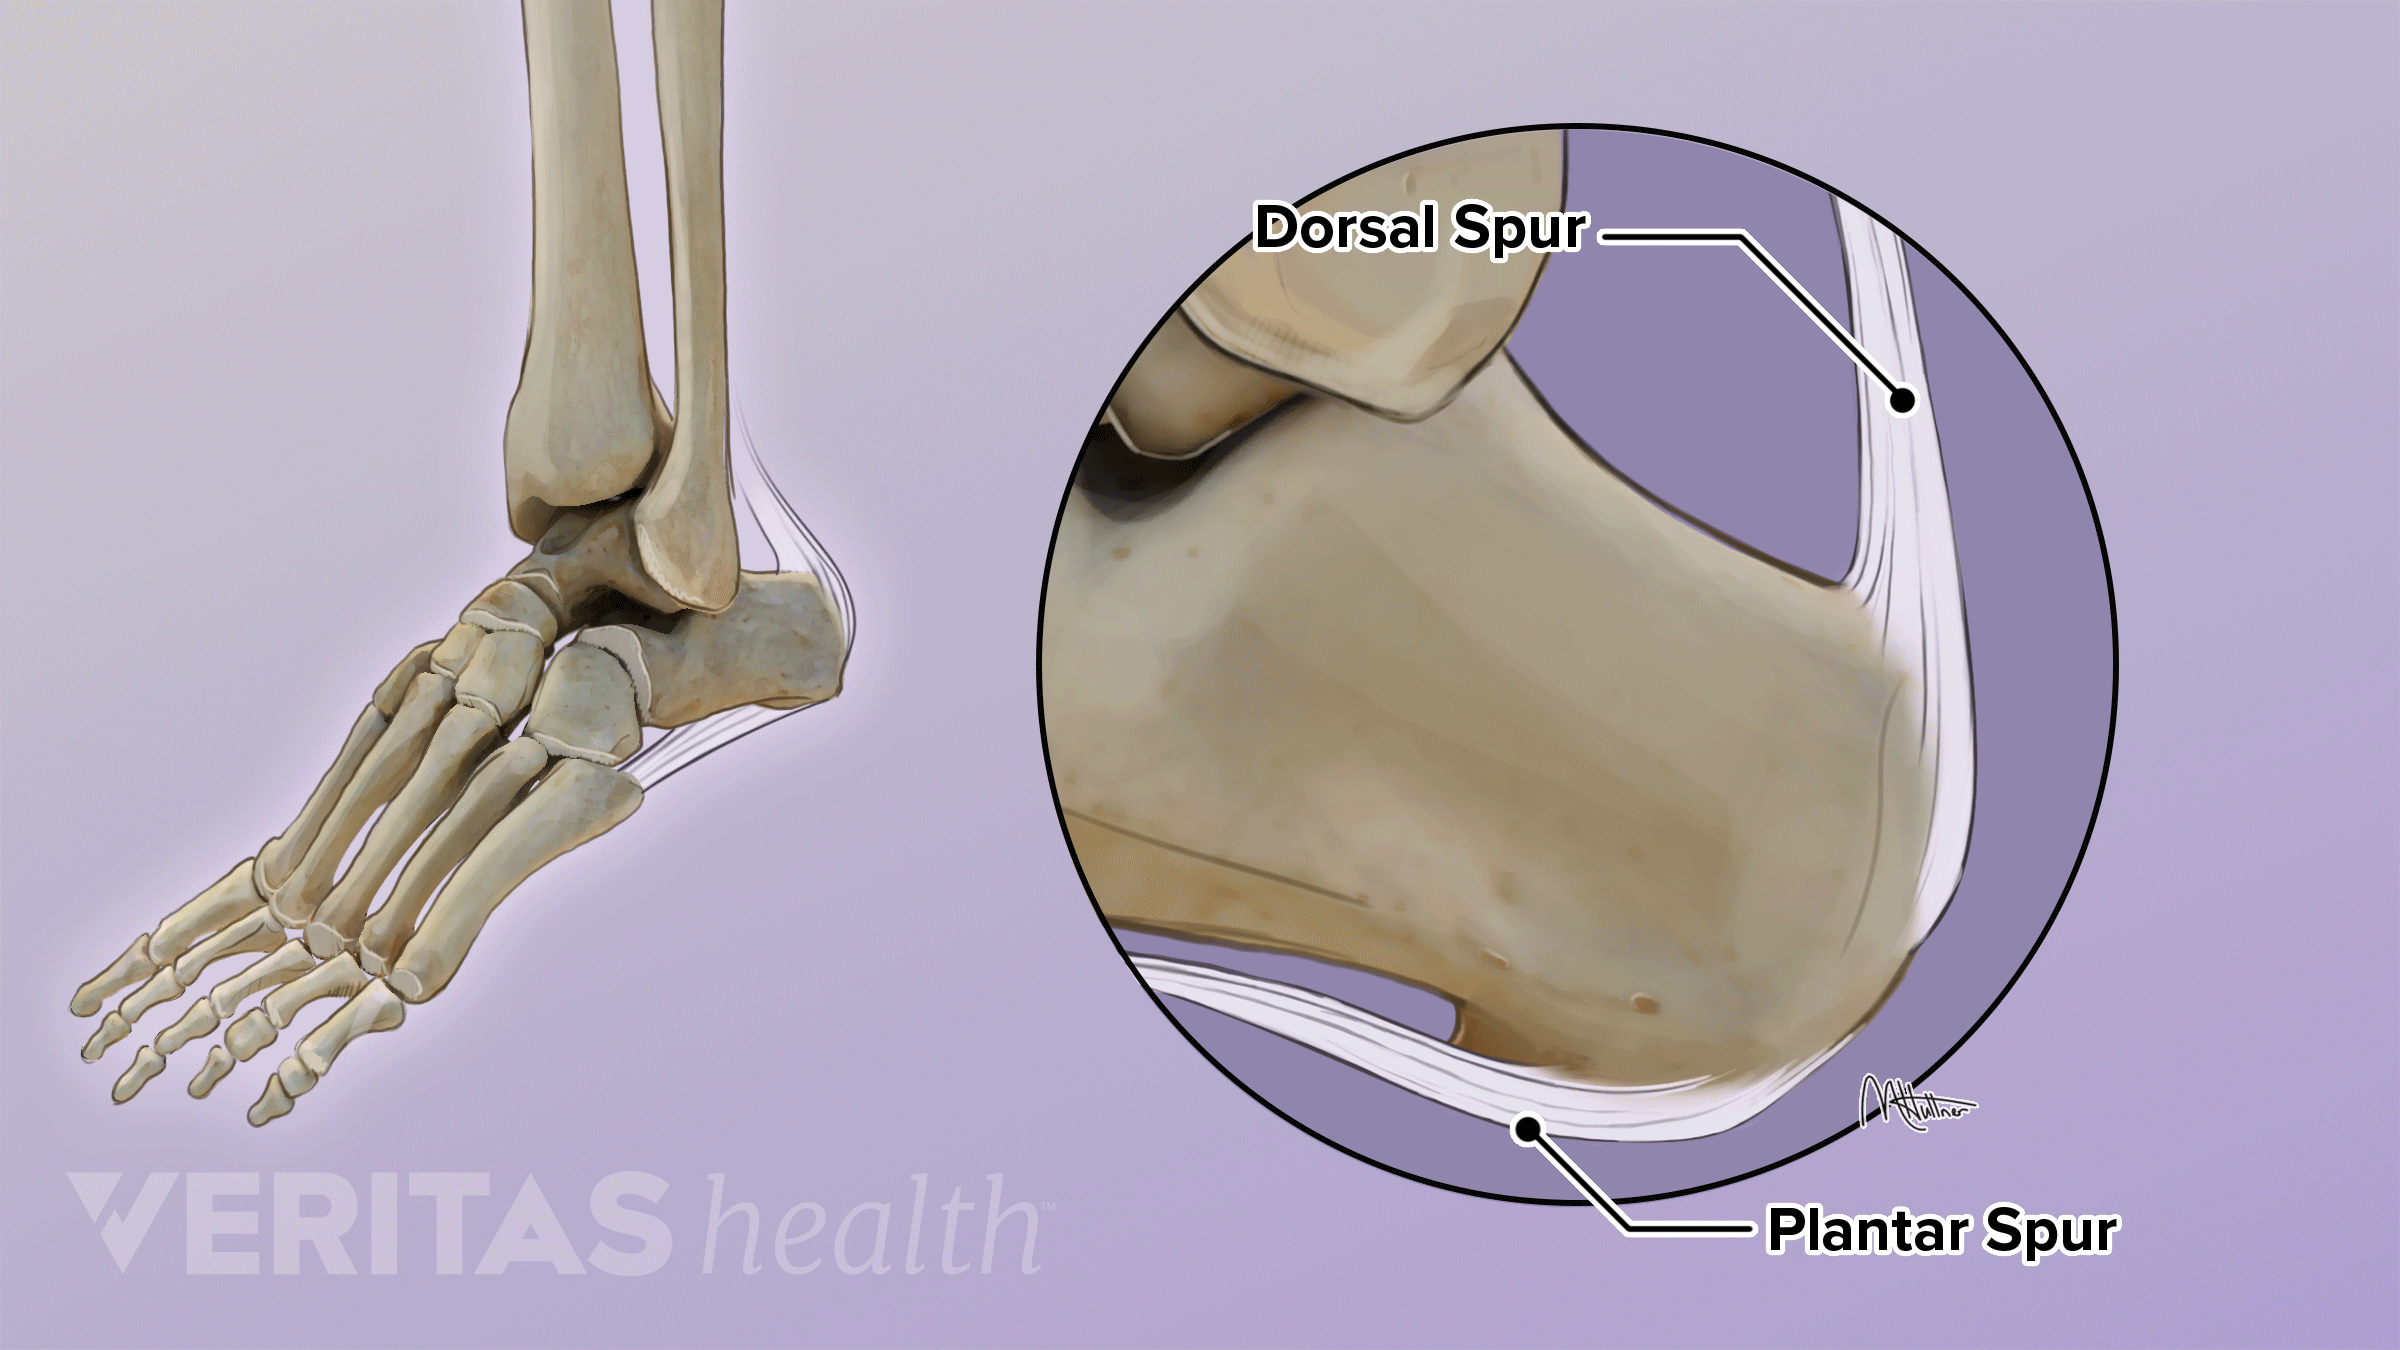 Animation showing pain points of plantar spur and dorsal spur